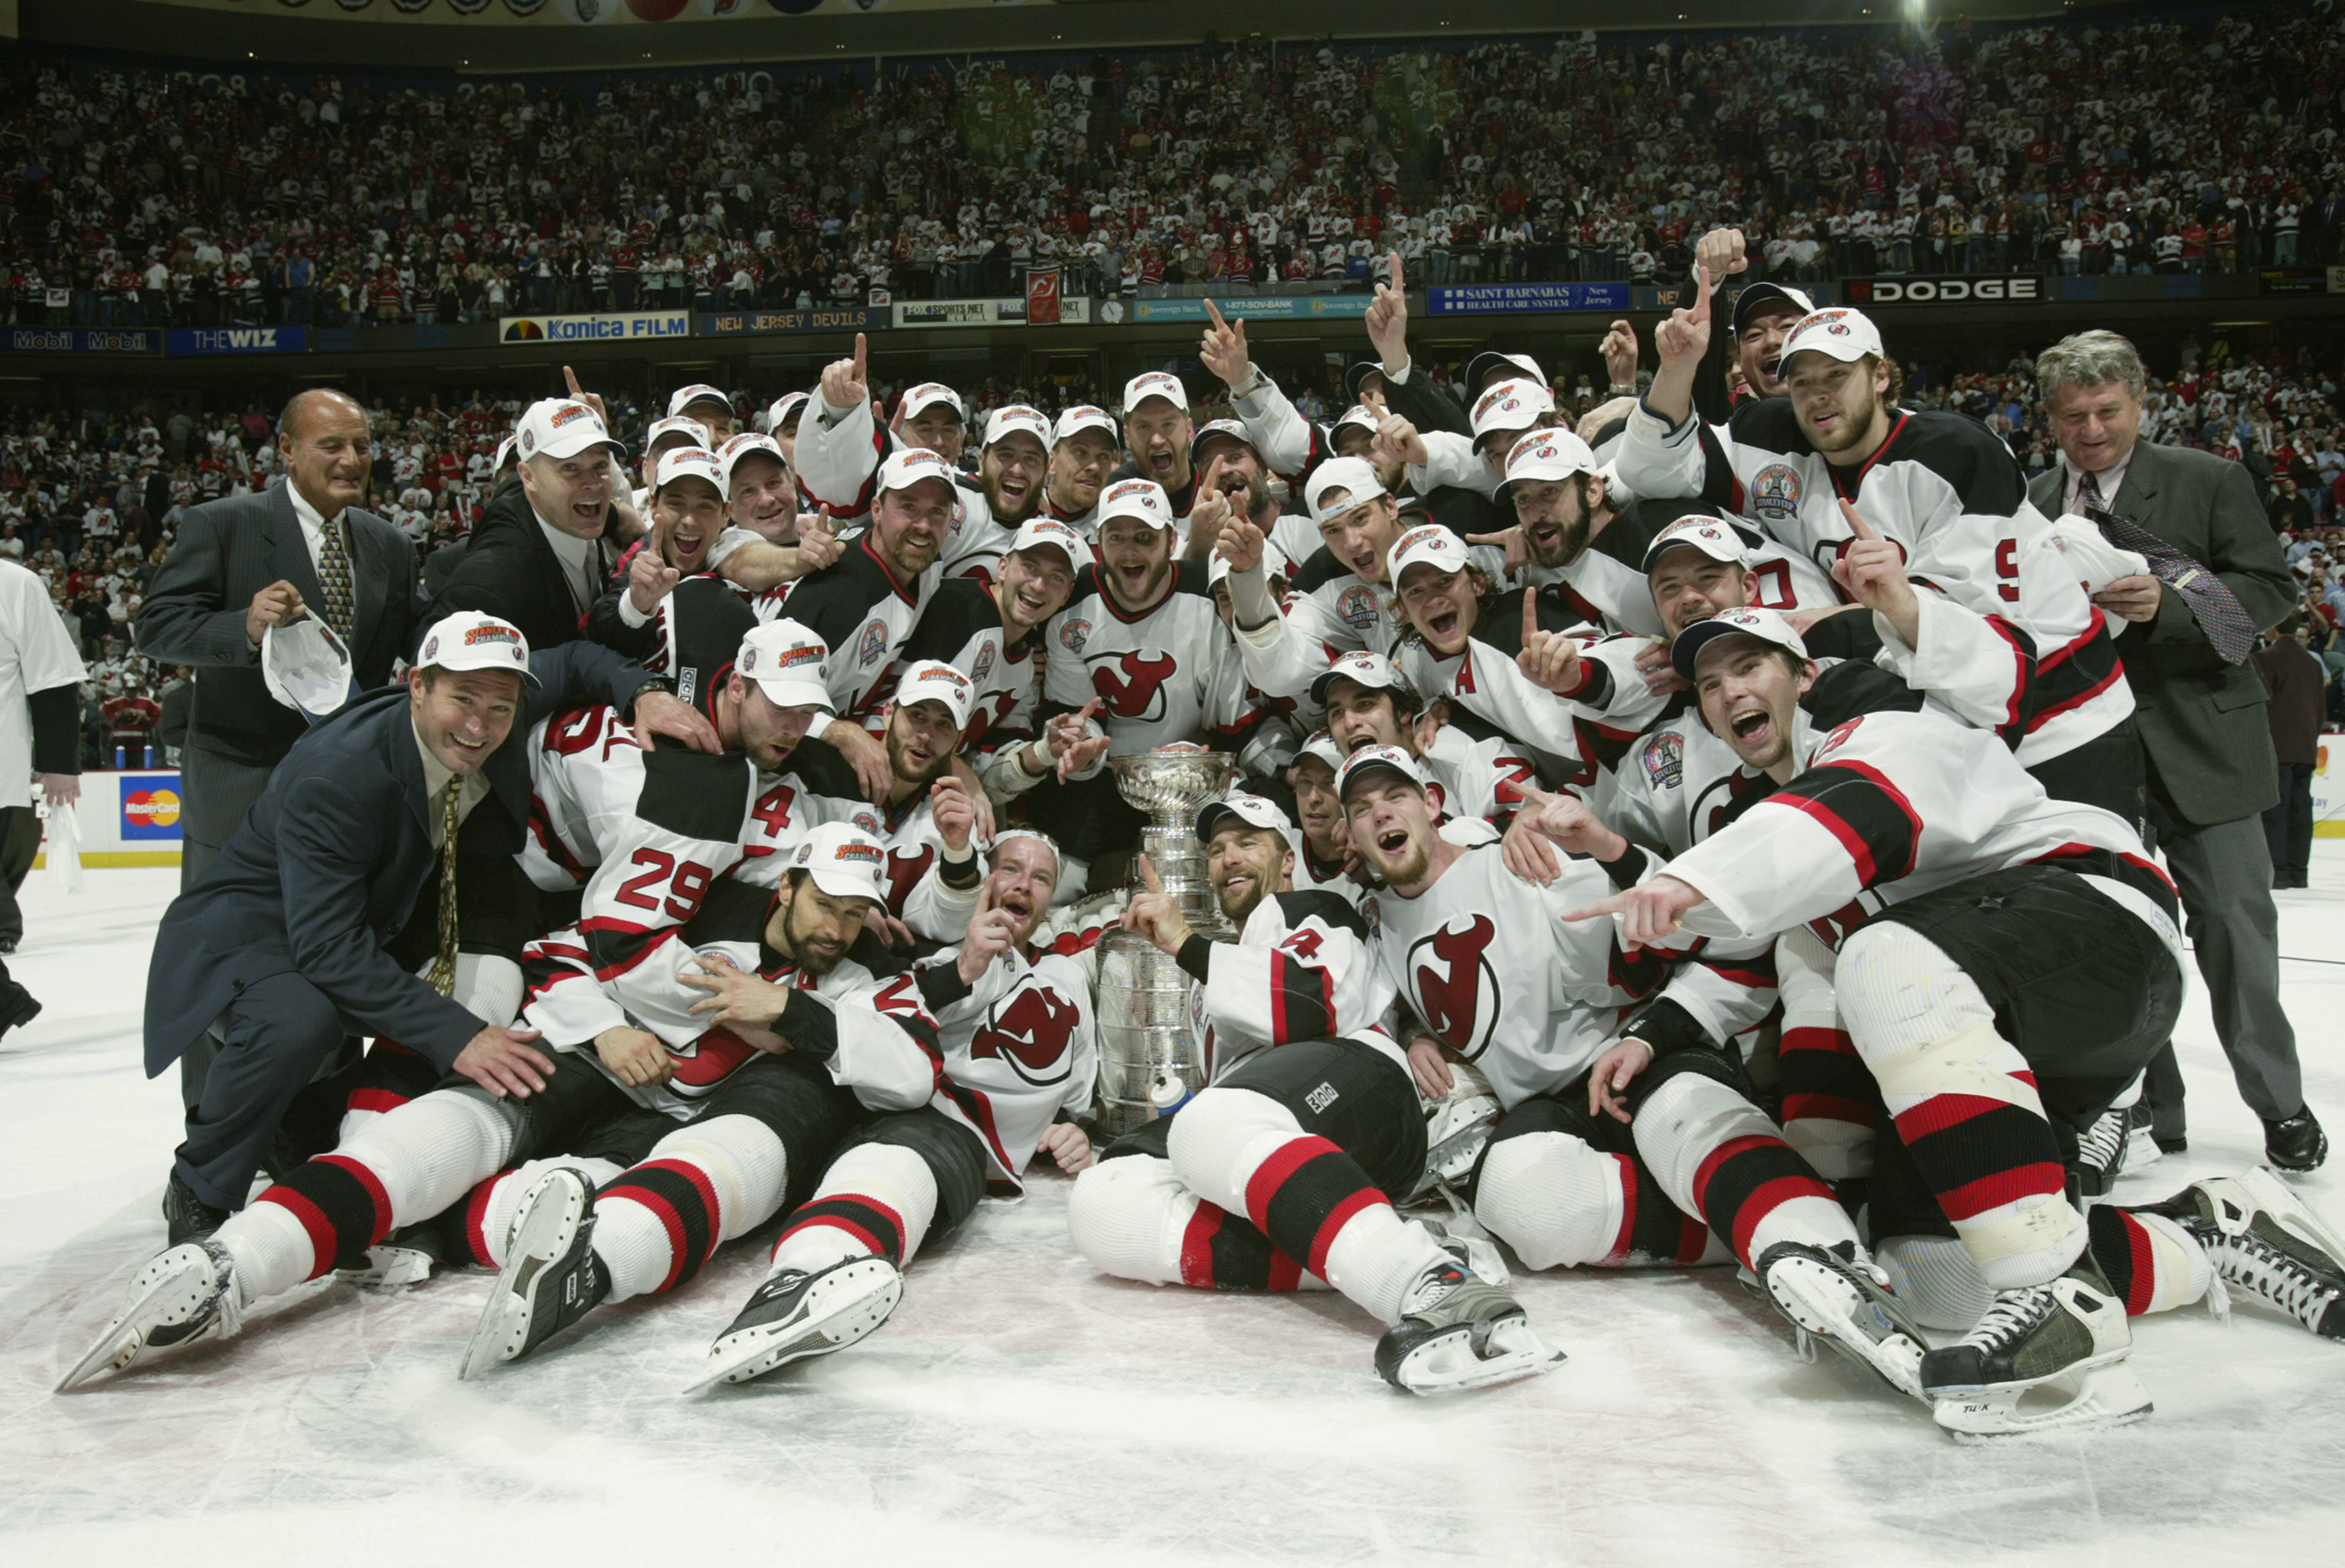 EAST RUTHERFORD, NJ - JUNE 9:  The New Jersey Devils celebrate winning the Stanley Cup after defeating the Mighty Ducks of Anaheim 3-0 in game seven of the 2003 Stanley Cup Finals at Continental Airlines Arena on June 9, 2003 in East Rutherford, New Jerse